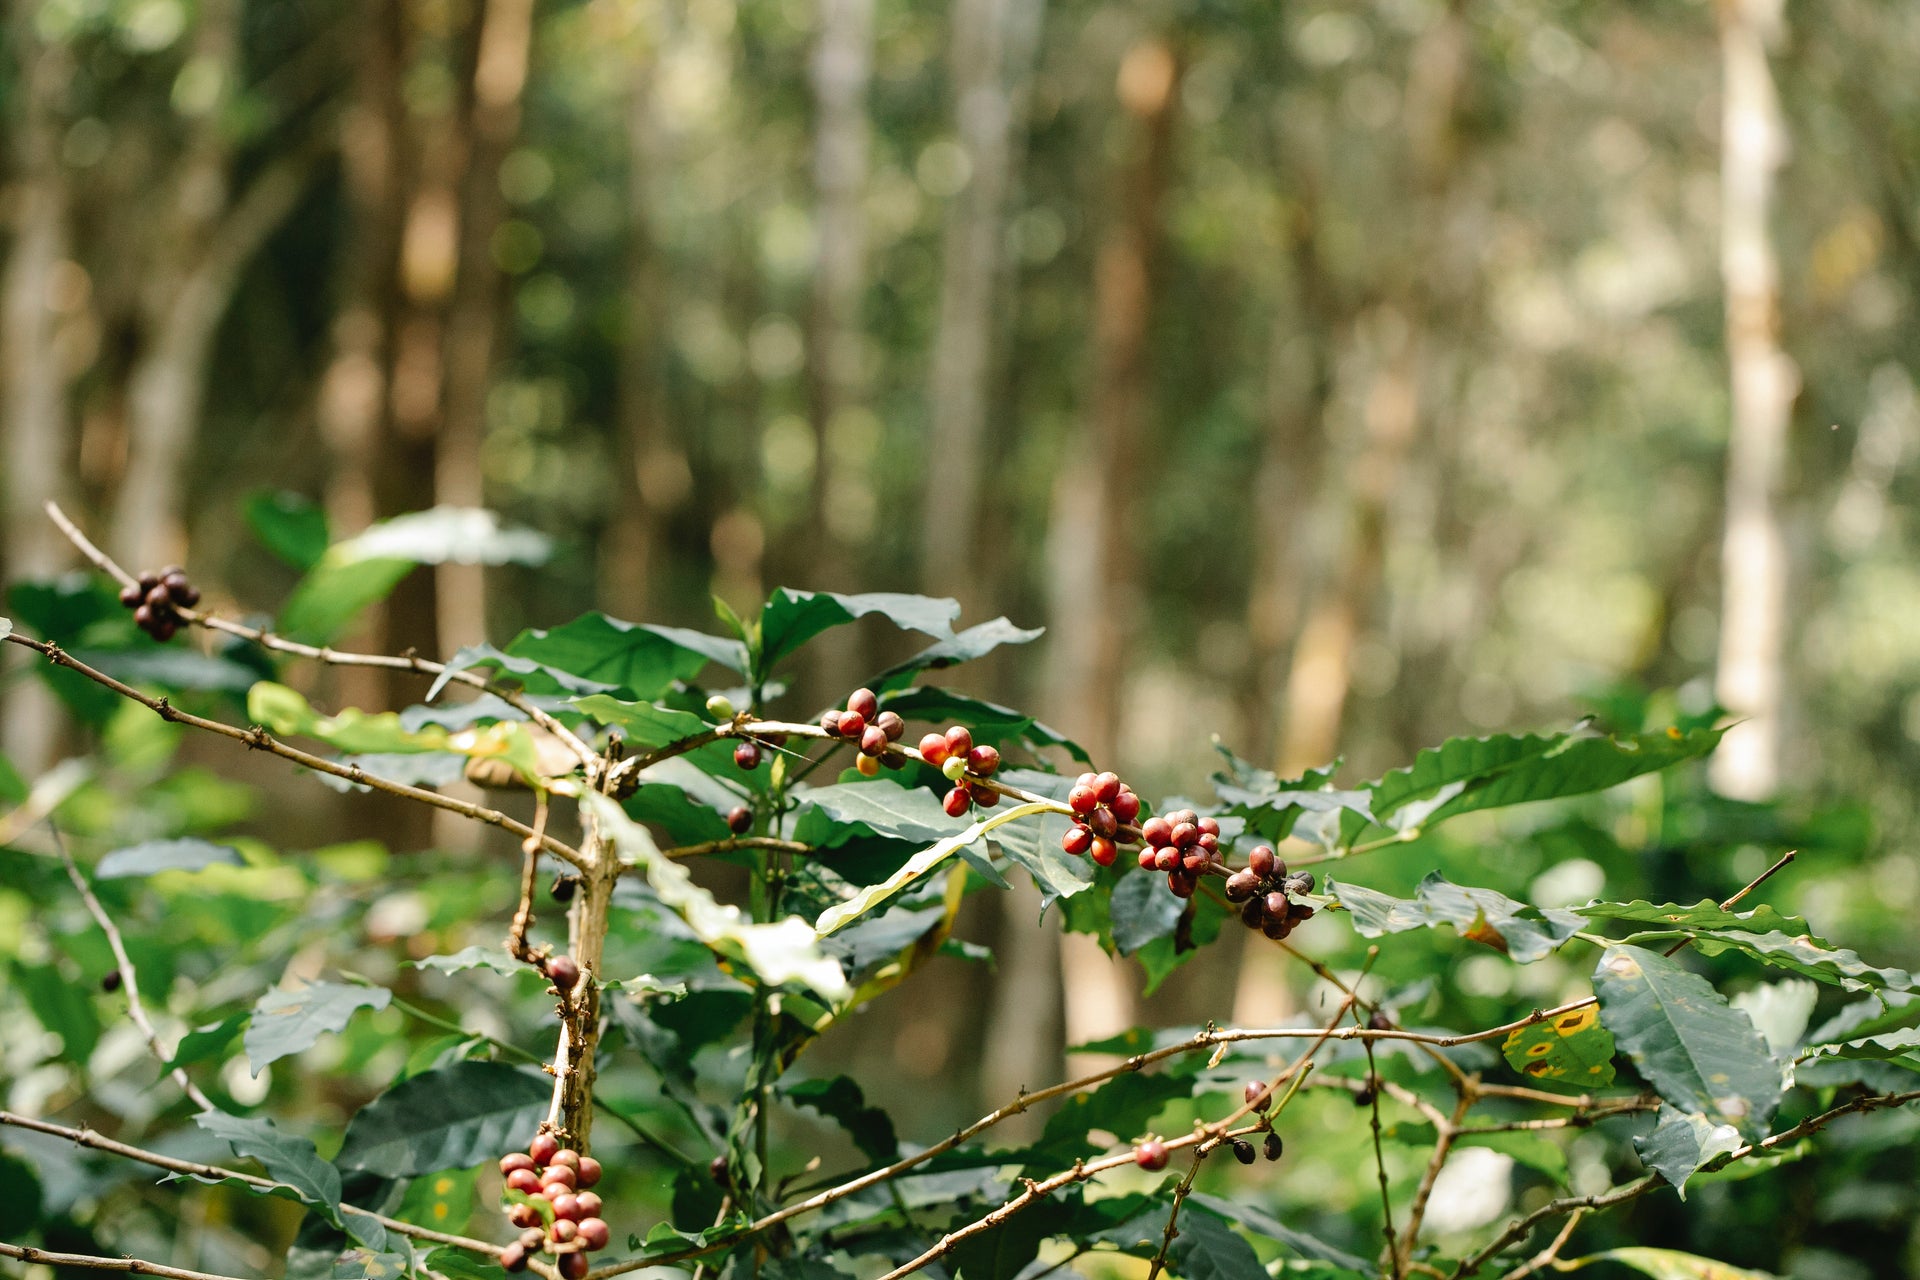 Certified Fair Trade means we work with coffee-producing countries that: